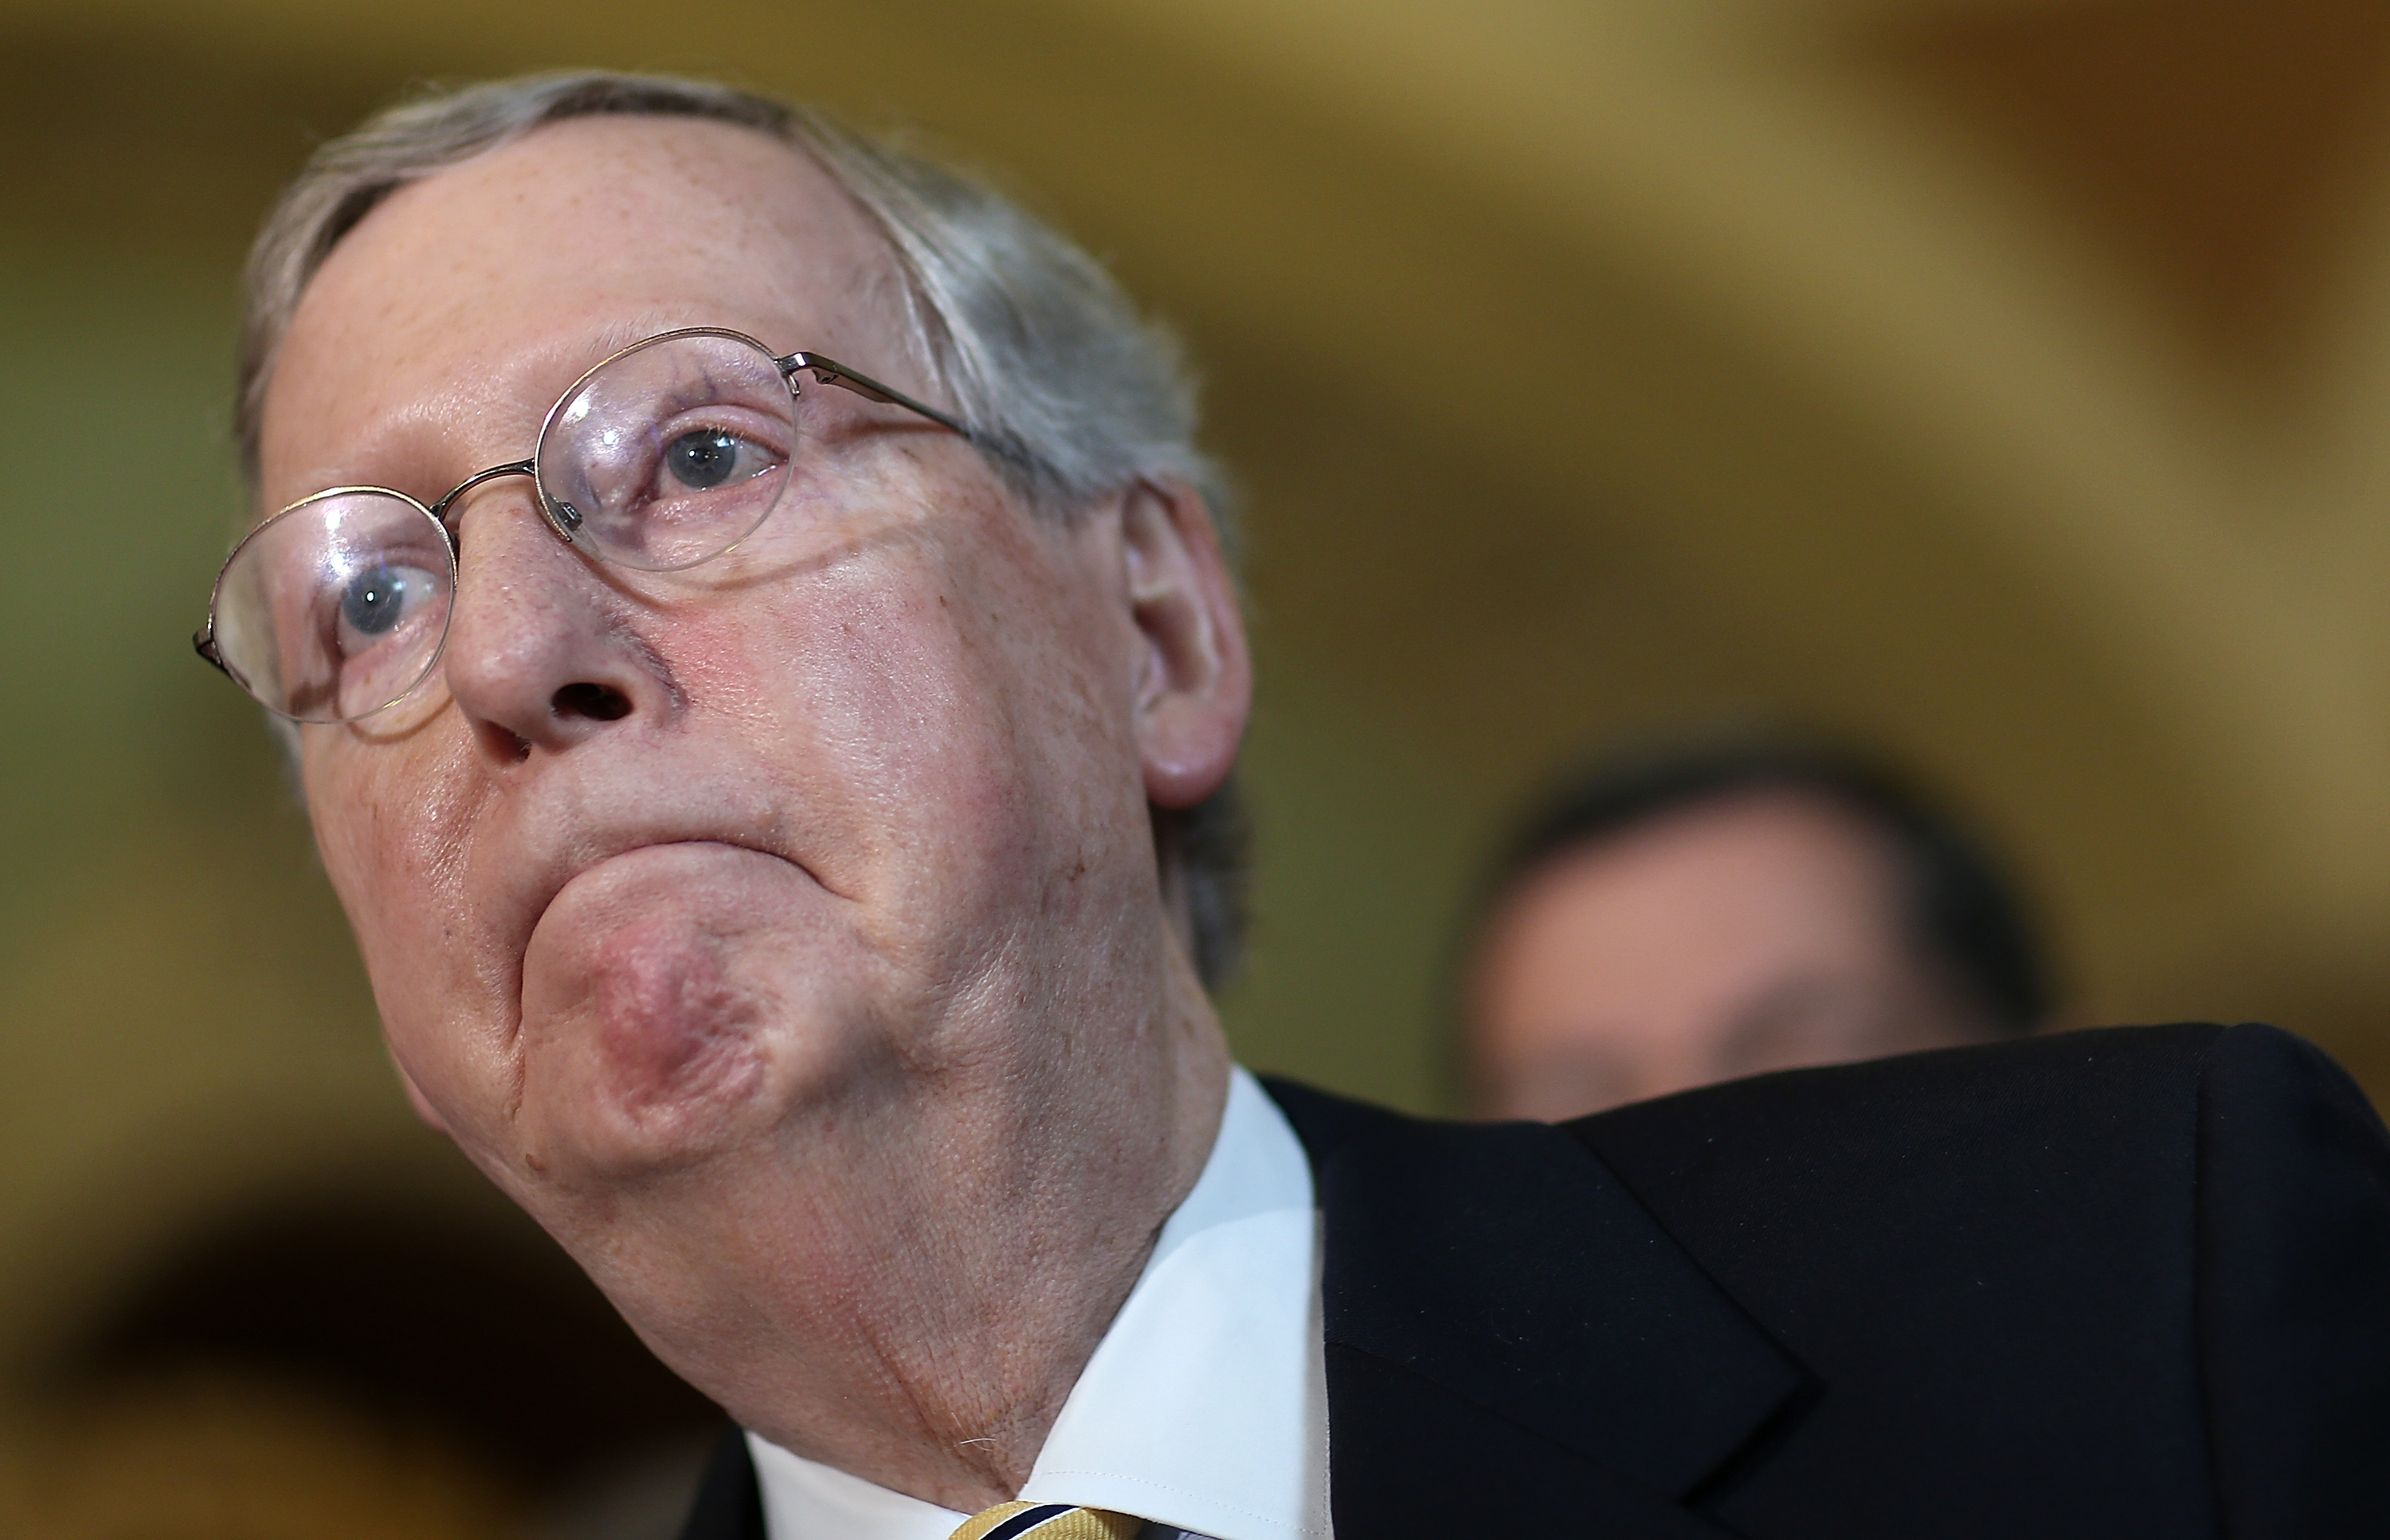 Mitch McConnell: Not enough votes to defund Planned Parenthood - CBS News